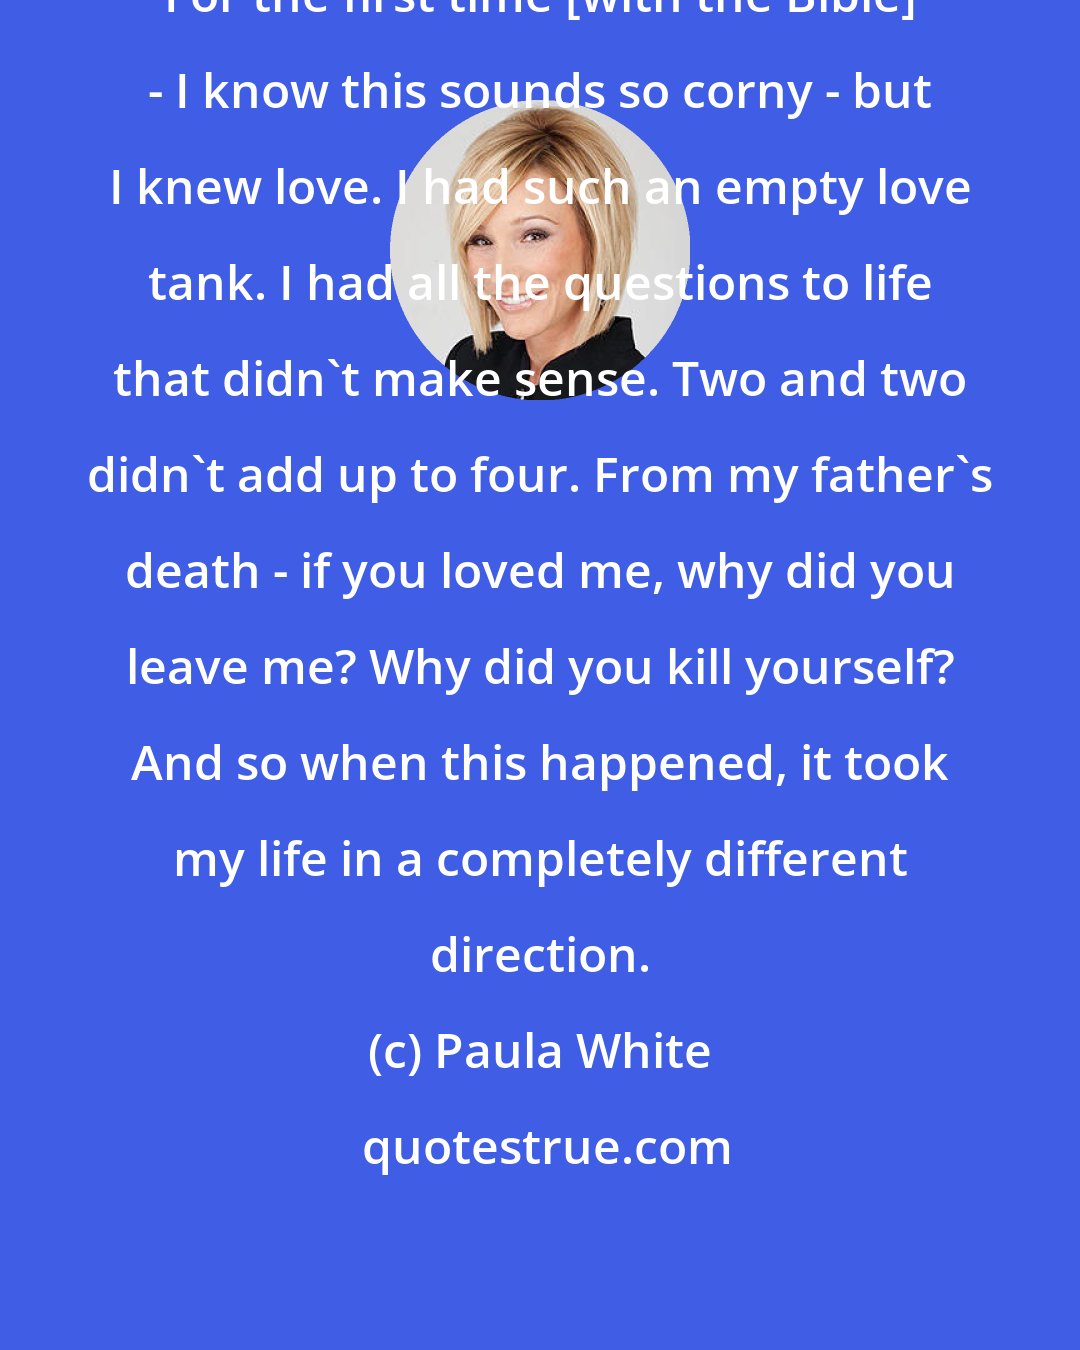 Paula White: For the first time [with the Bible] - I know this sounds so corny - but I knew love. I had such an empty love tank. I had all the questions to life that didn't make sense. Two and two didn't add up to four. From my father's death - if you loved me, why did you leave me? Why did you kill yourself? And so when this happened, it took my life in a completely different direction.